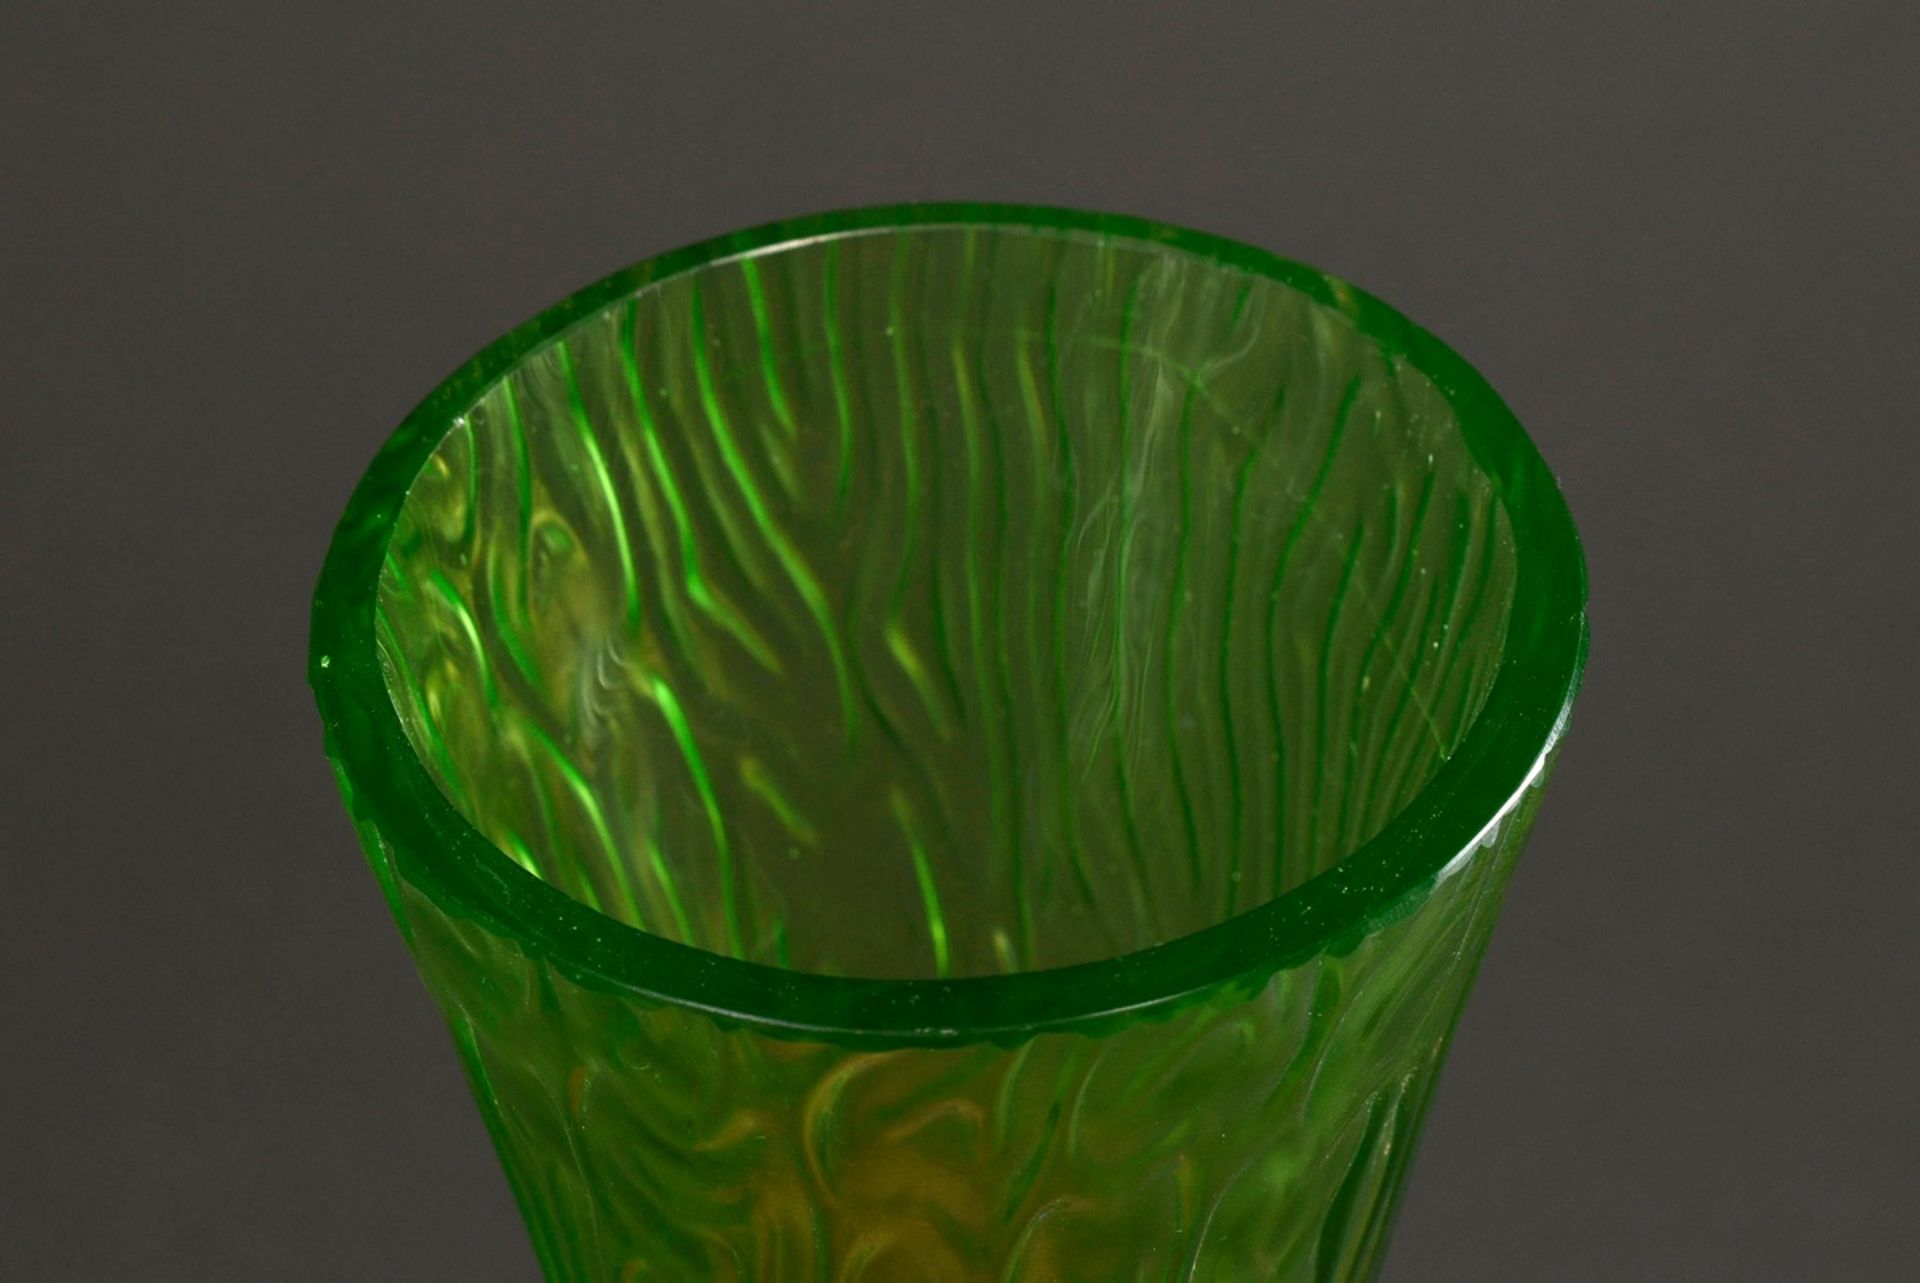 Green iridescent art nouveau baluster vase with conical neck and bark pattern, h. 25cm - Image 2 of 3